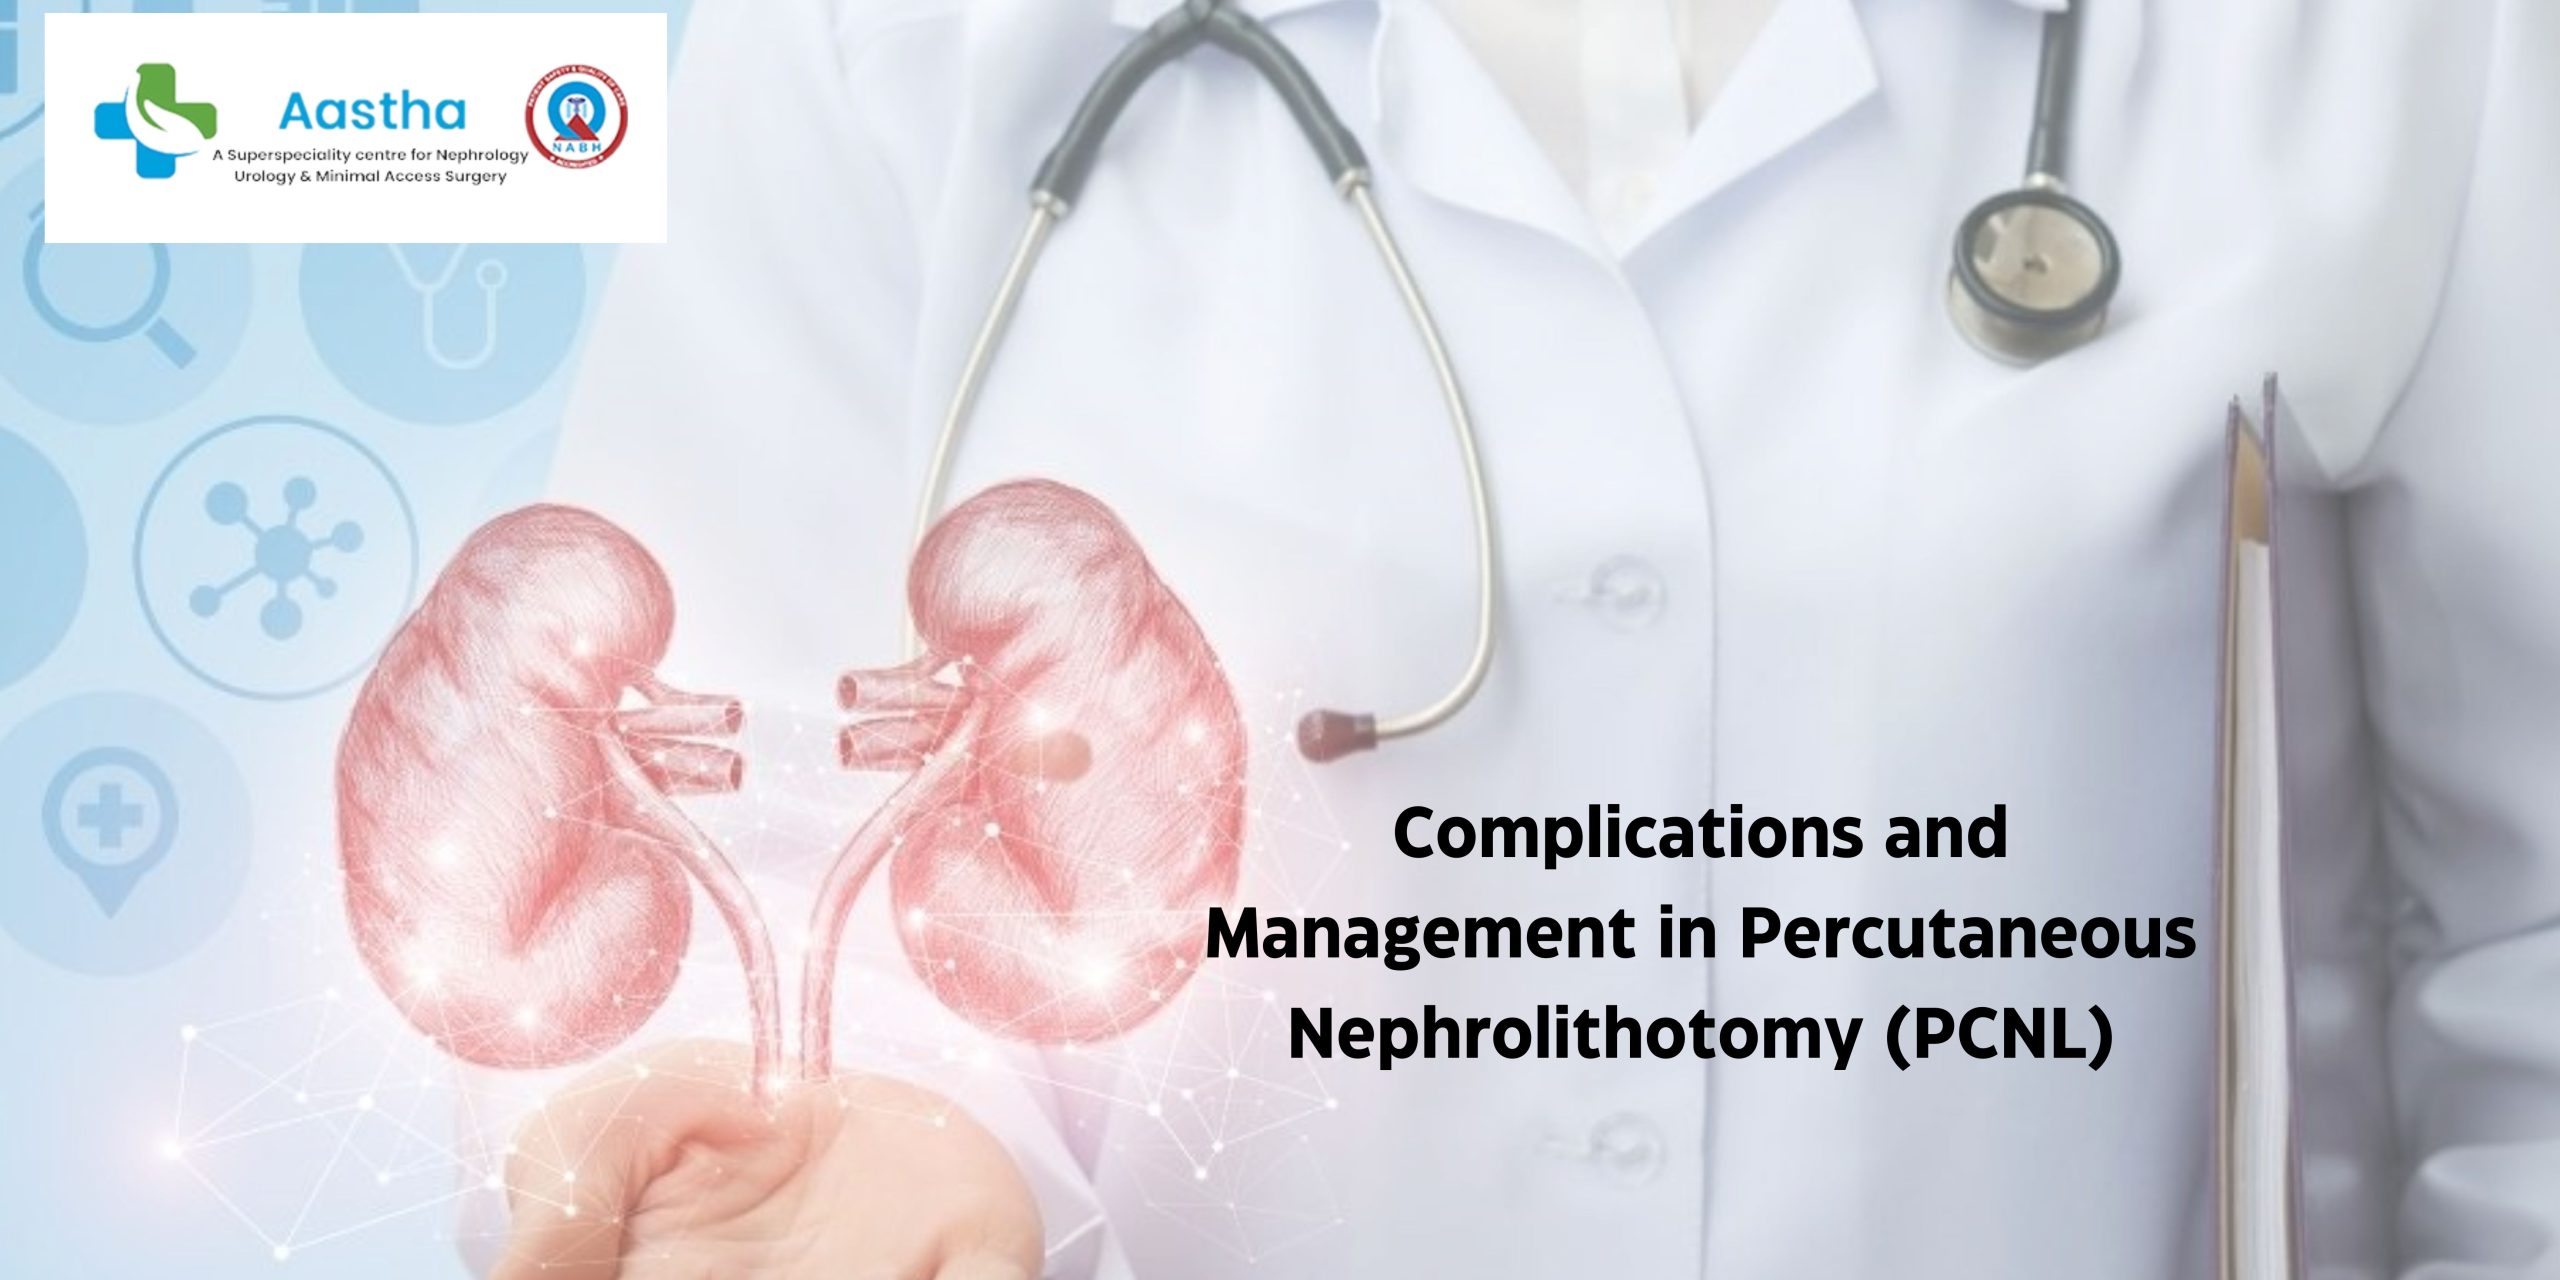 Complications and Management in Percutaneous Nephrolithotomy (PCNL)